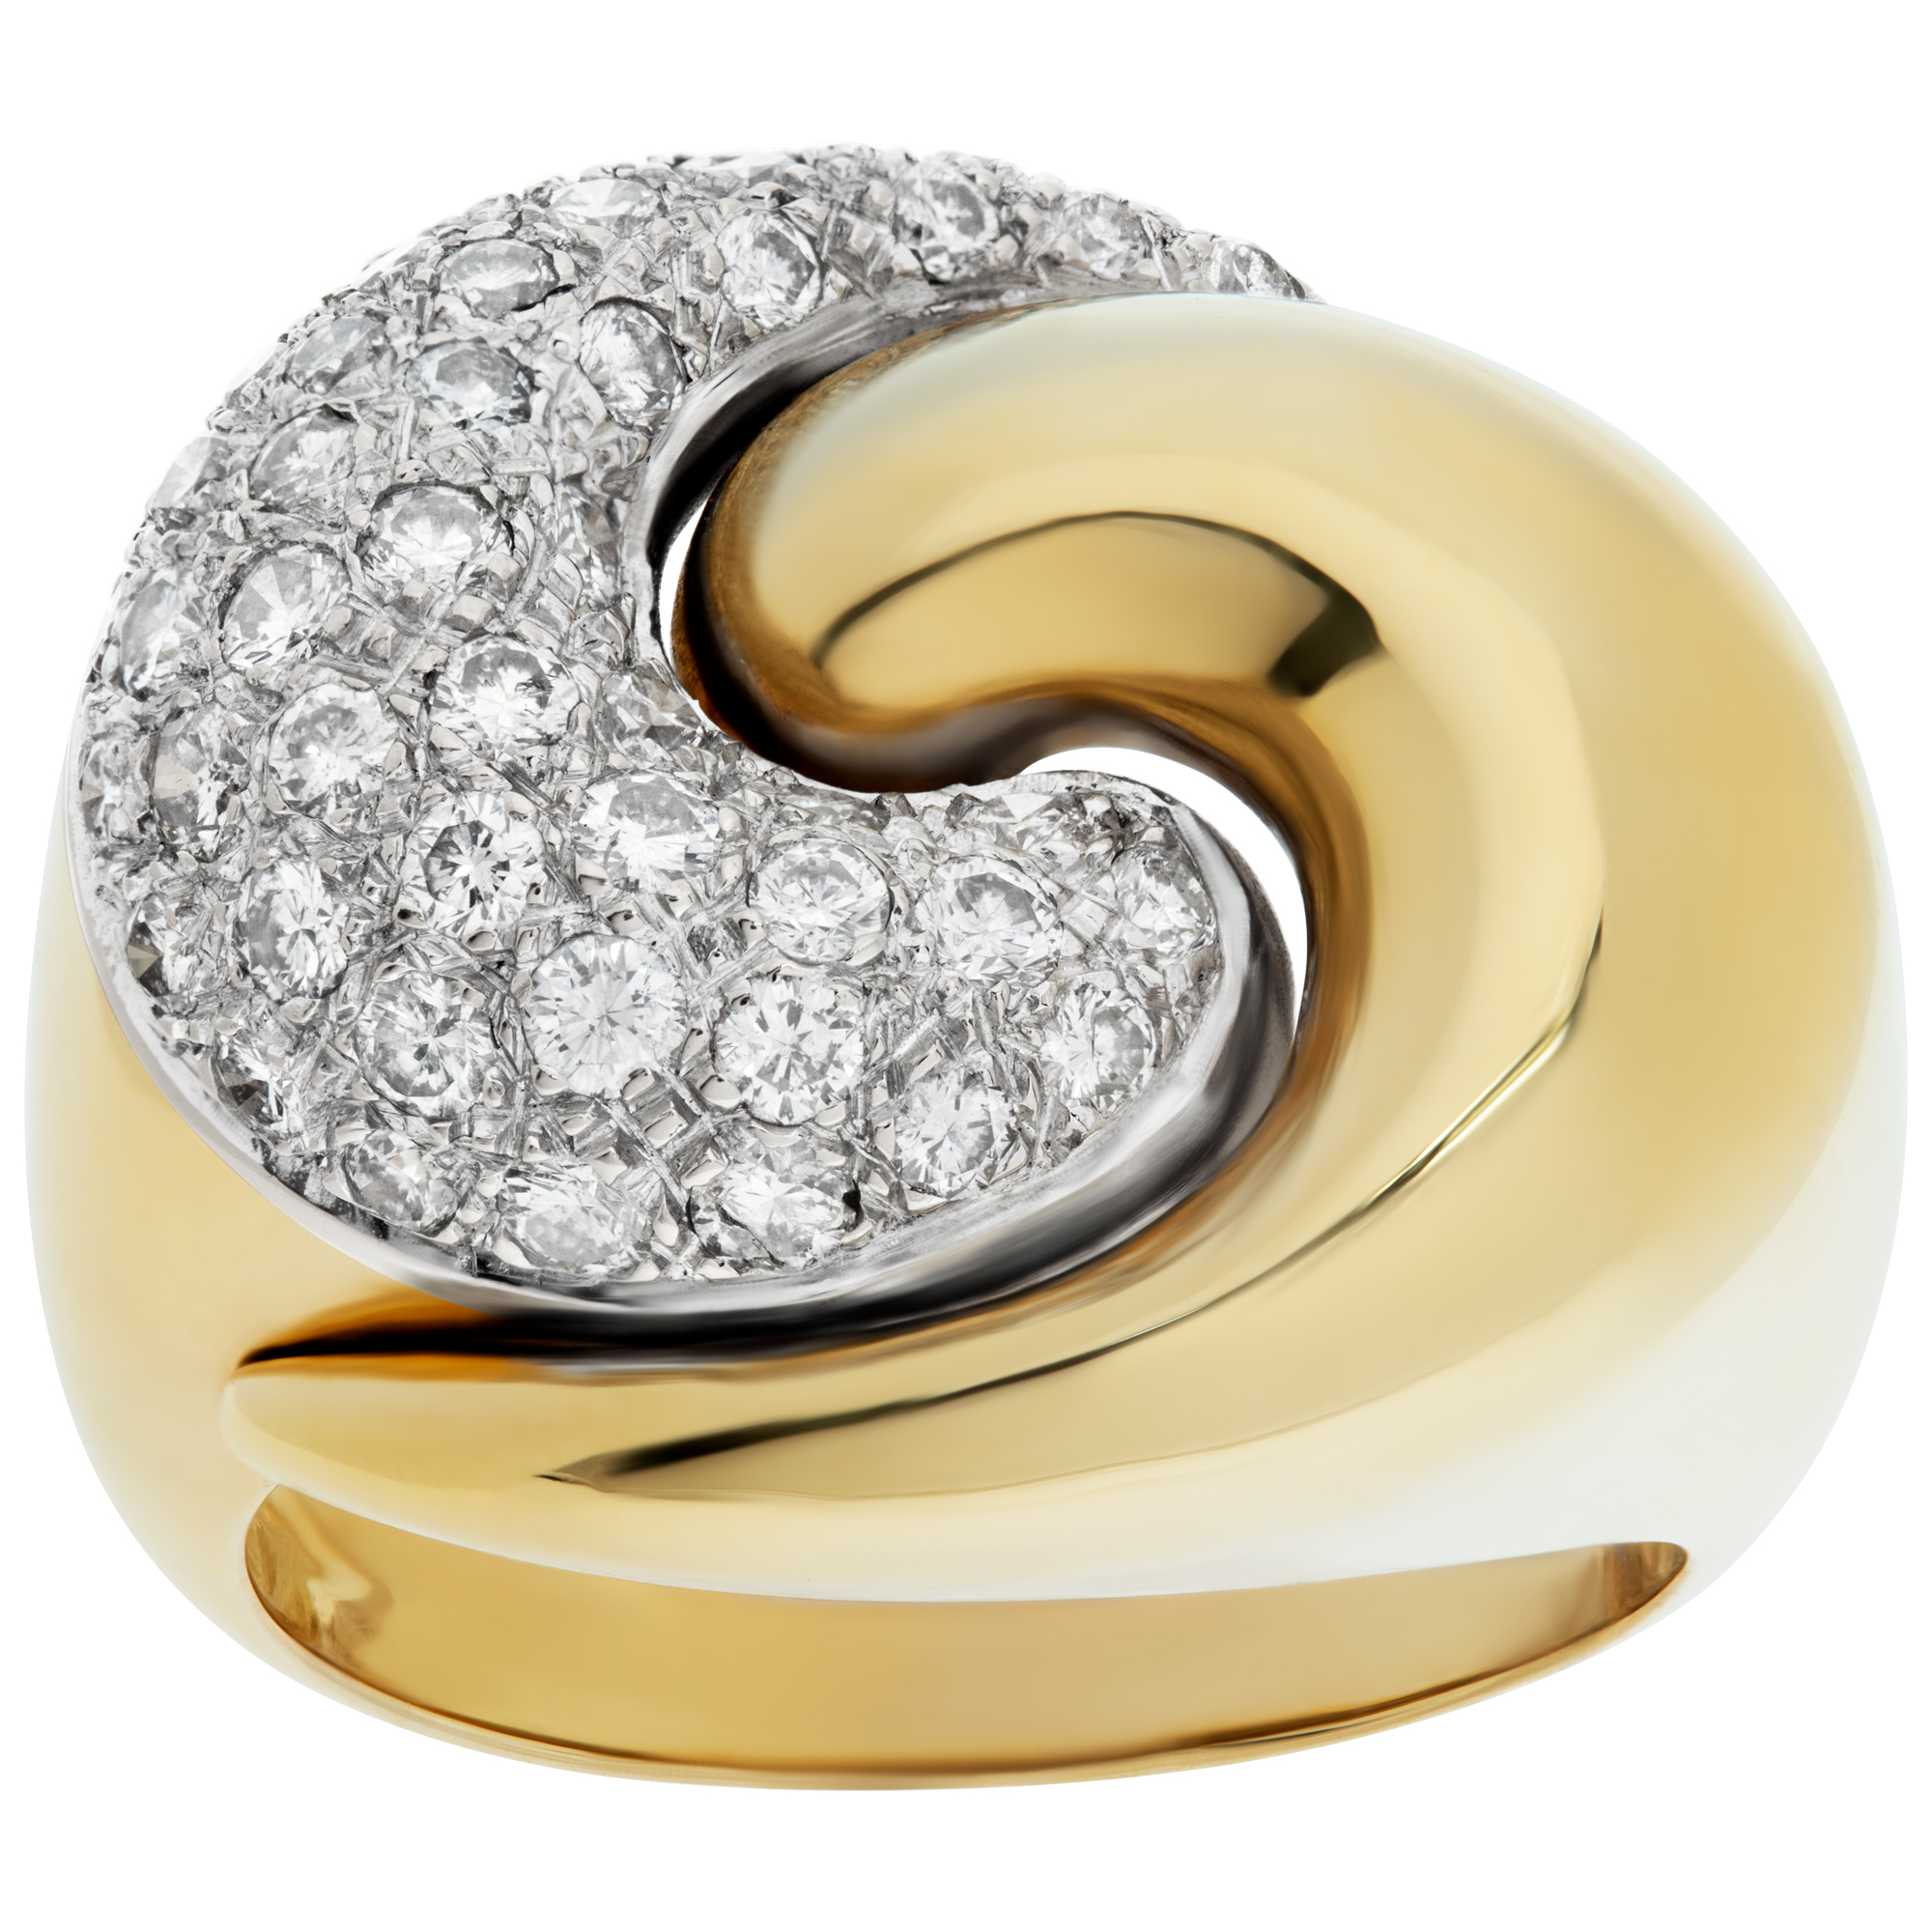 Pave diamond ring in 18k yellow gold with approximately 1.00 carat round brilliant cut diamonds.